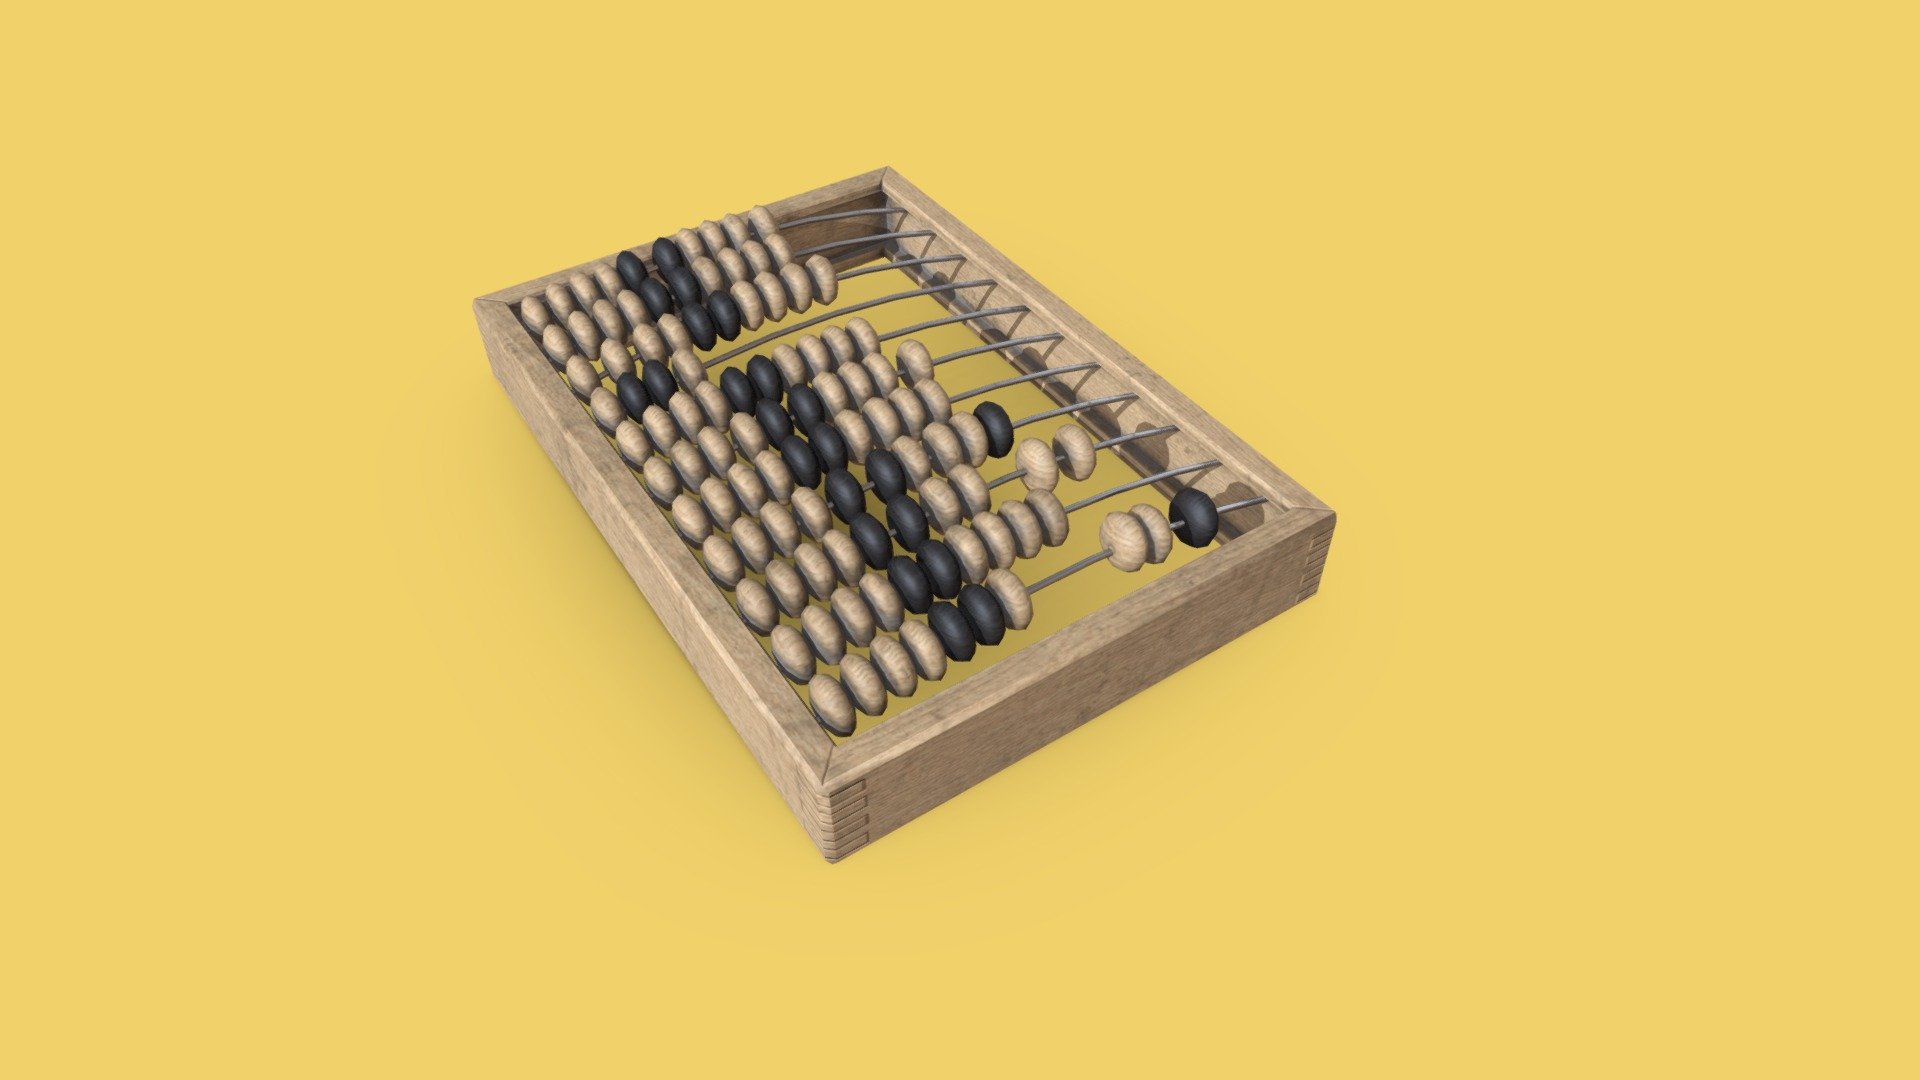 Vintage Abacus


Model is low poly.
Model is Game-Ready/VR ready.
Model is UV mapped and unwrapped (non overlapping)
Asset is fully textured, 1024x1024 .png’s. PBR
Model is ready for Unity and Unreal game engines.
File Format: .FBX

Additional zip file contains all the files 3d model